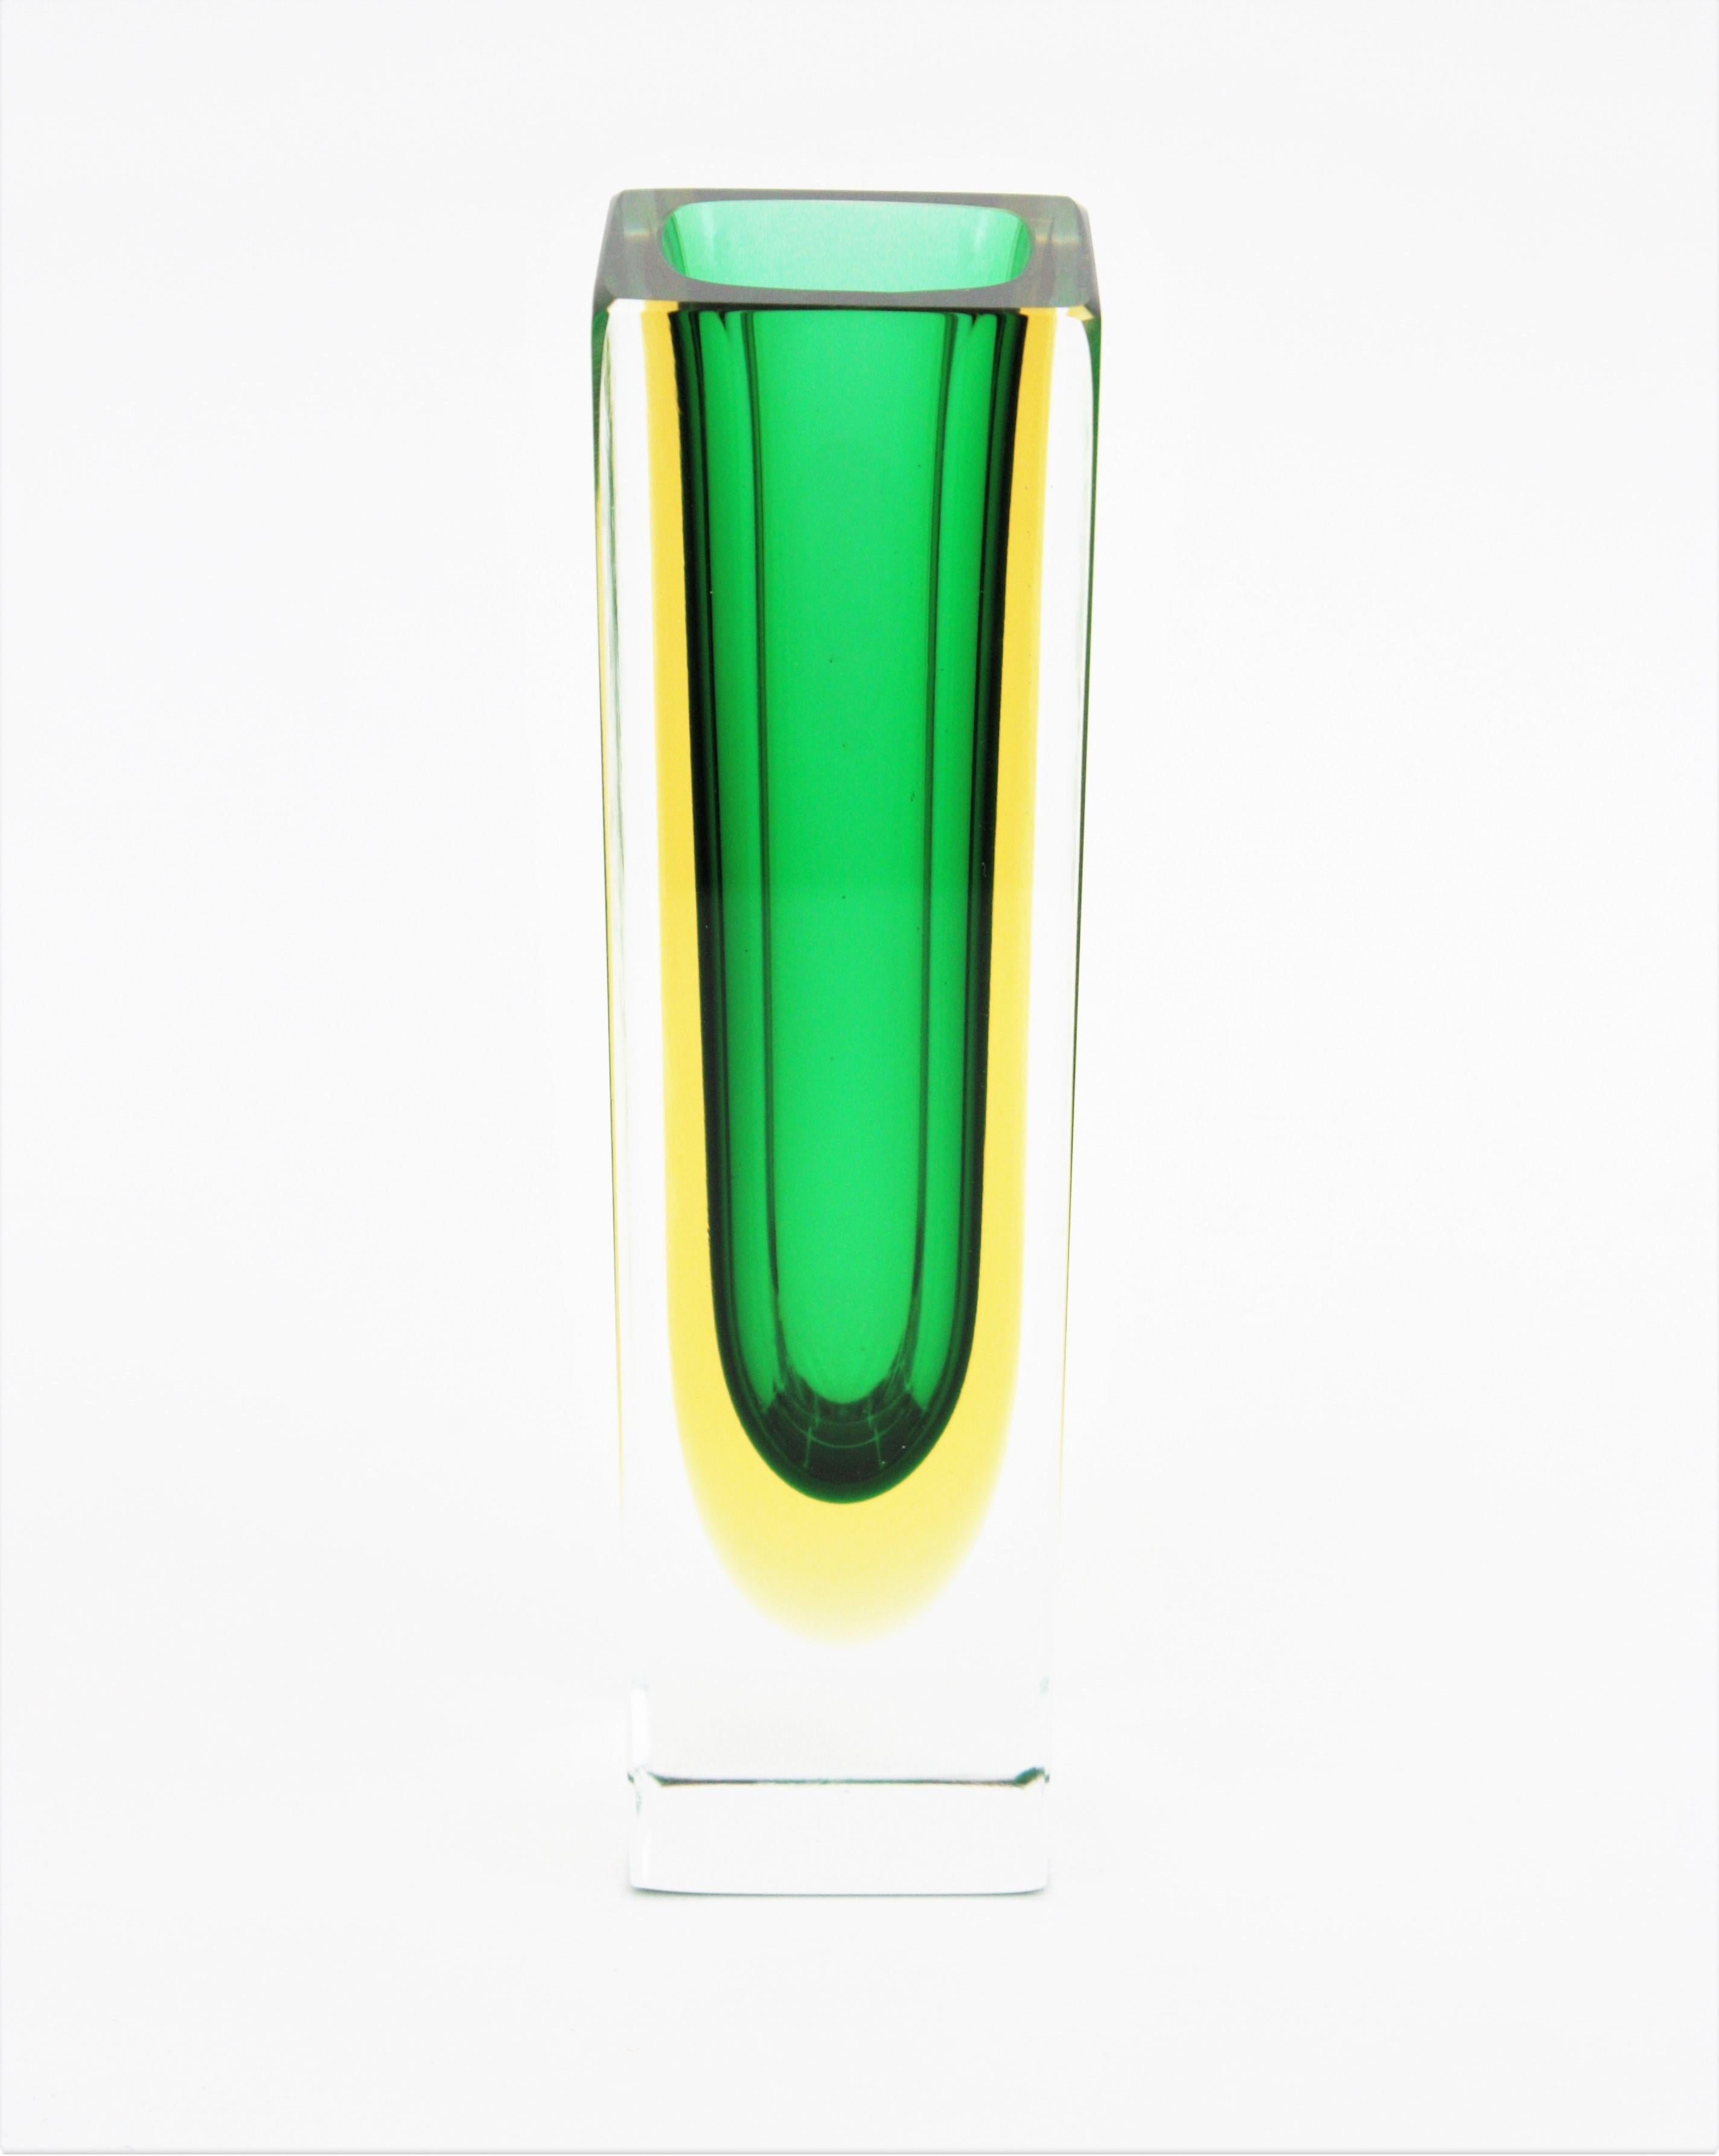 Eye-catching faceted sommerso green and yellow art glass vase. Attributed to Flavio Poli for Seguso. Italy, 1960s.
Green glass with a layer in yellow glass submerged into clear glass using the Sommerso technique.
Place it alone or as a part of a